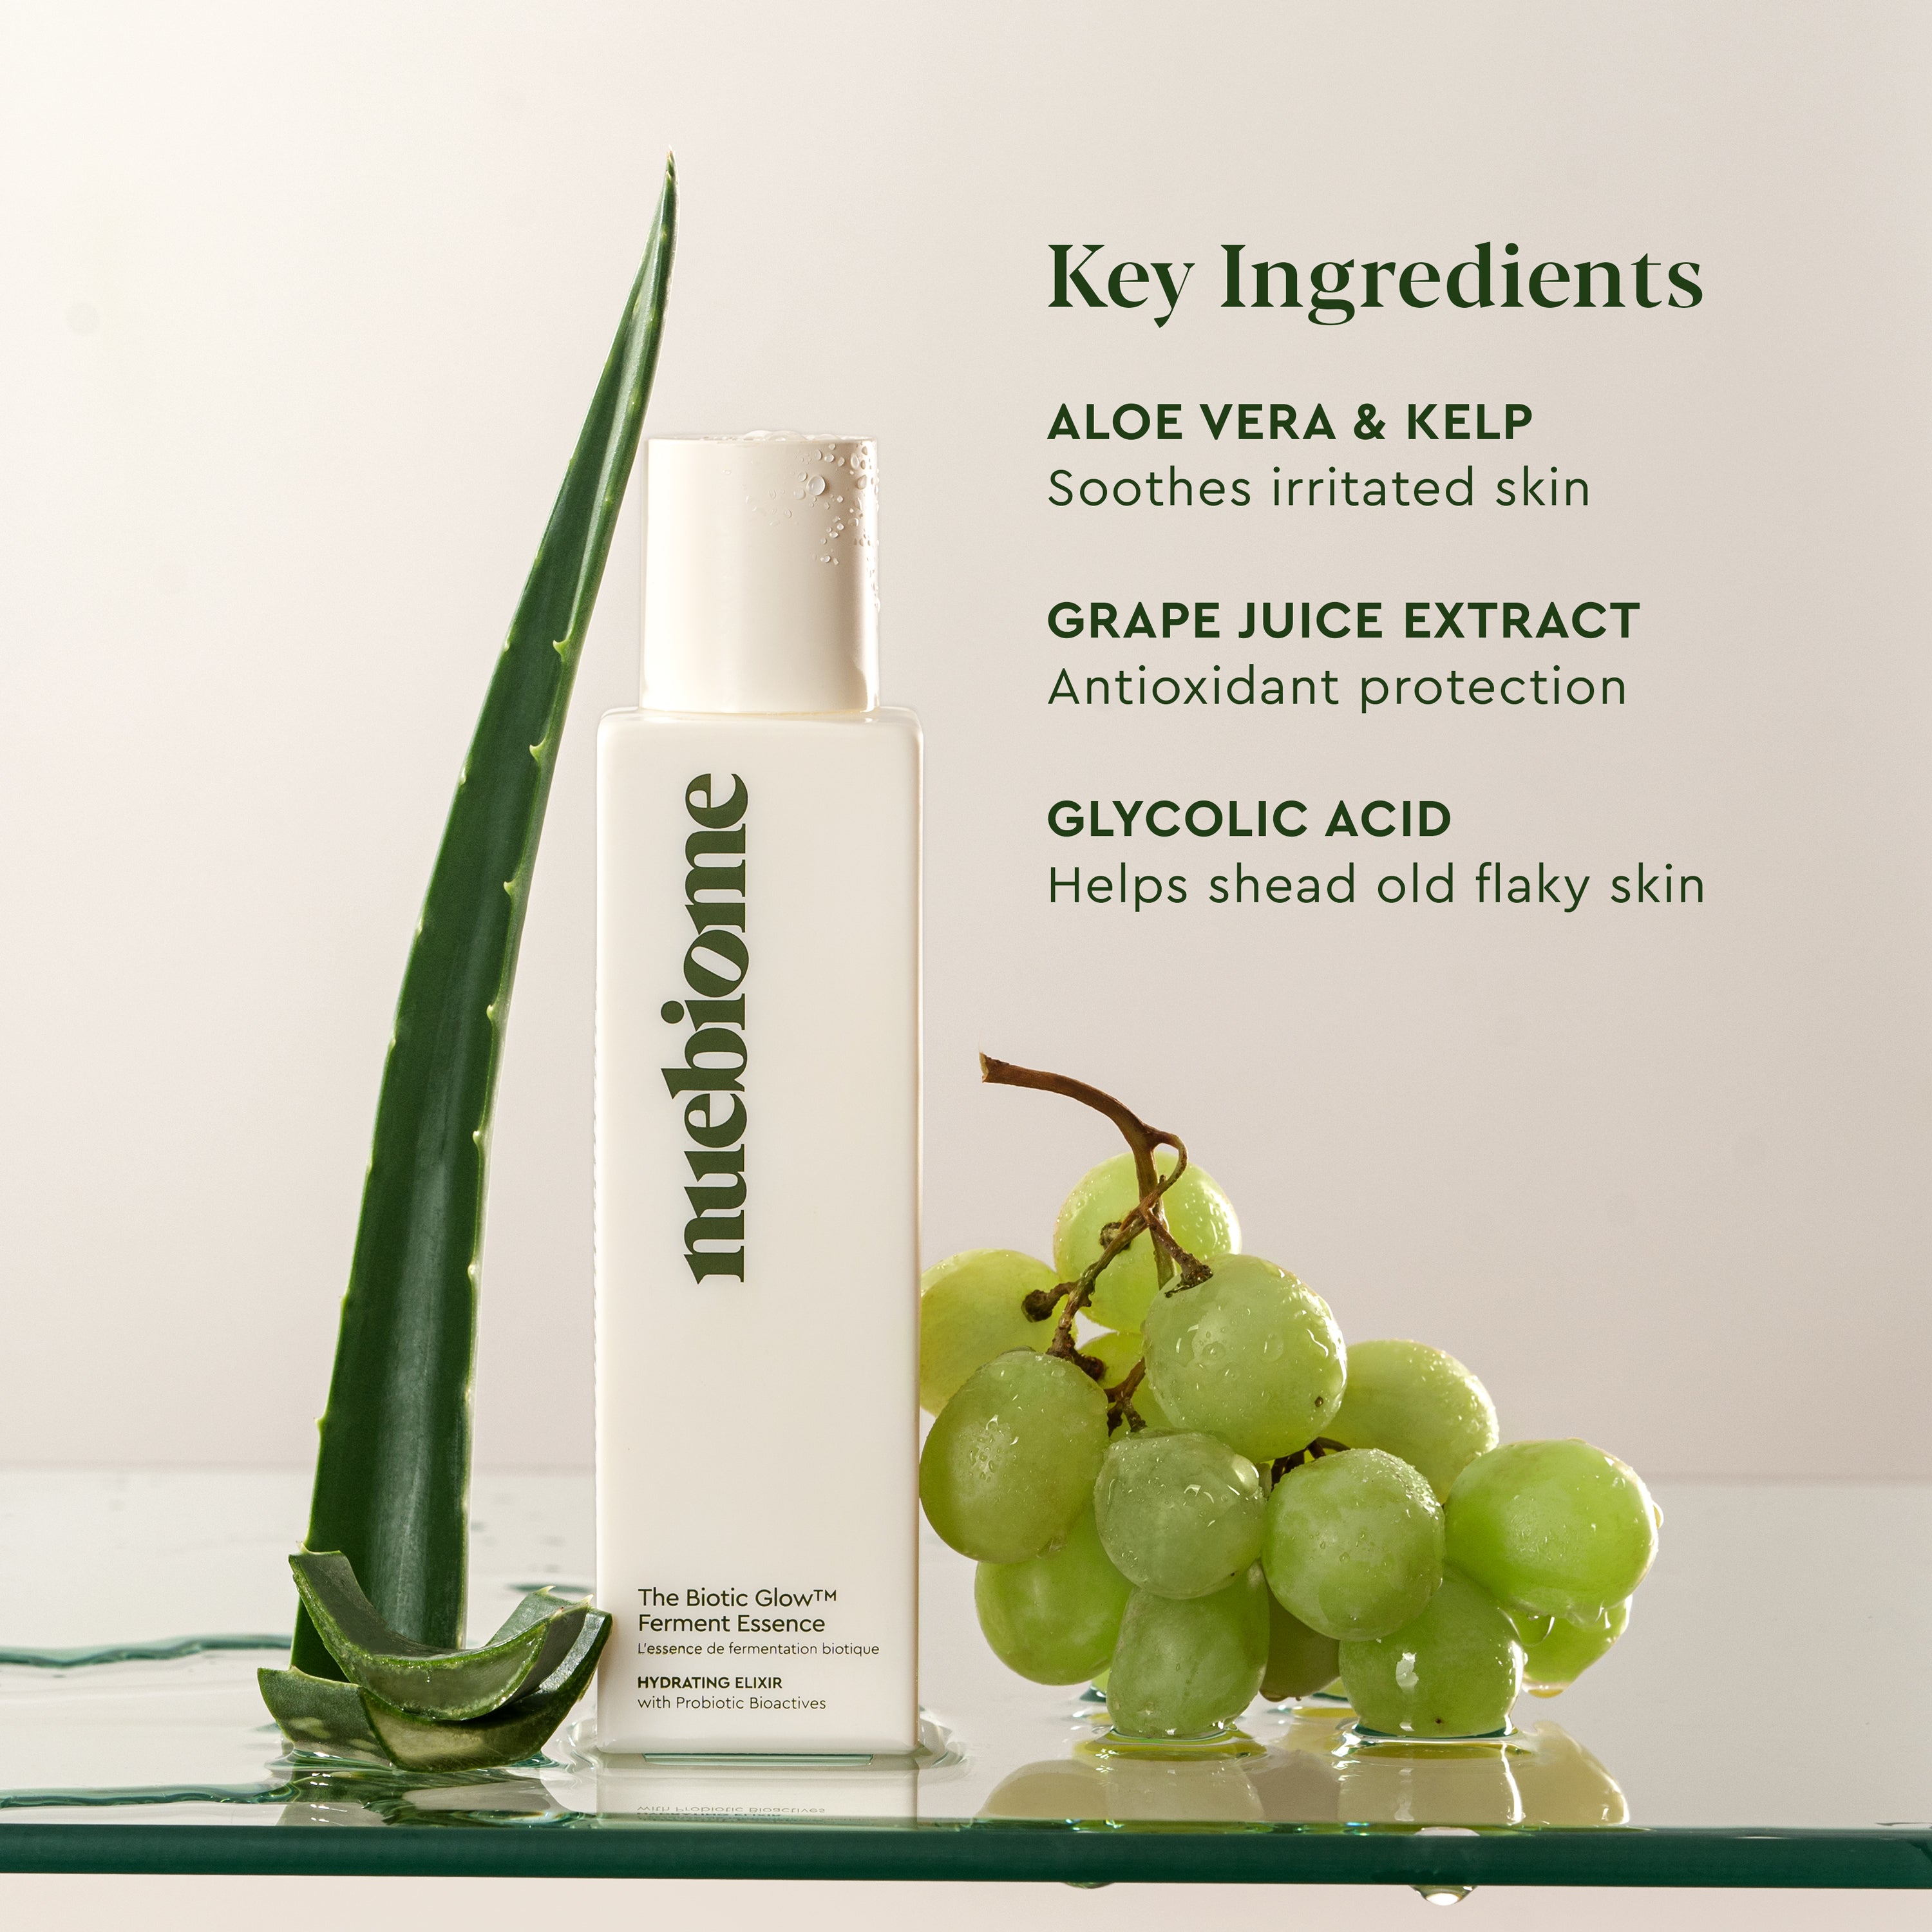 nuebiome face essence formulated with plant based ingredients, grape, aloe vera and glycolic acid